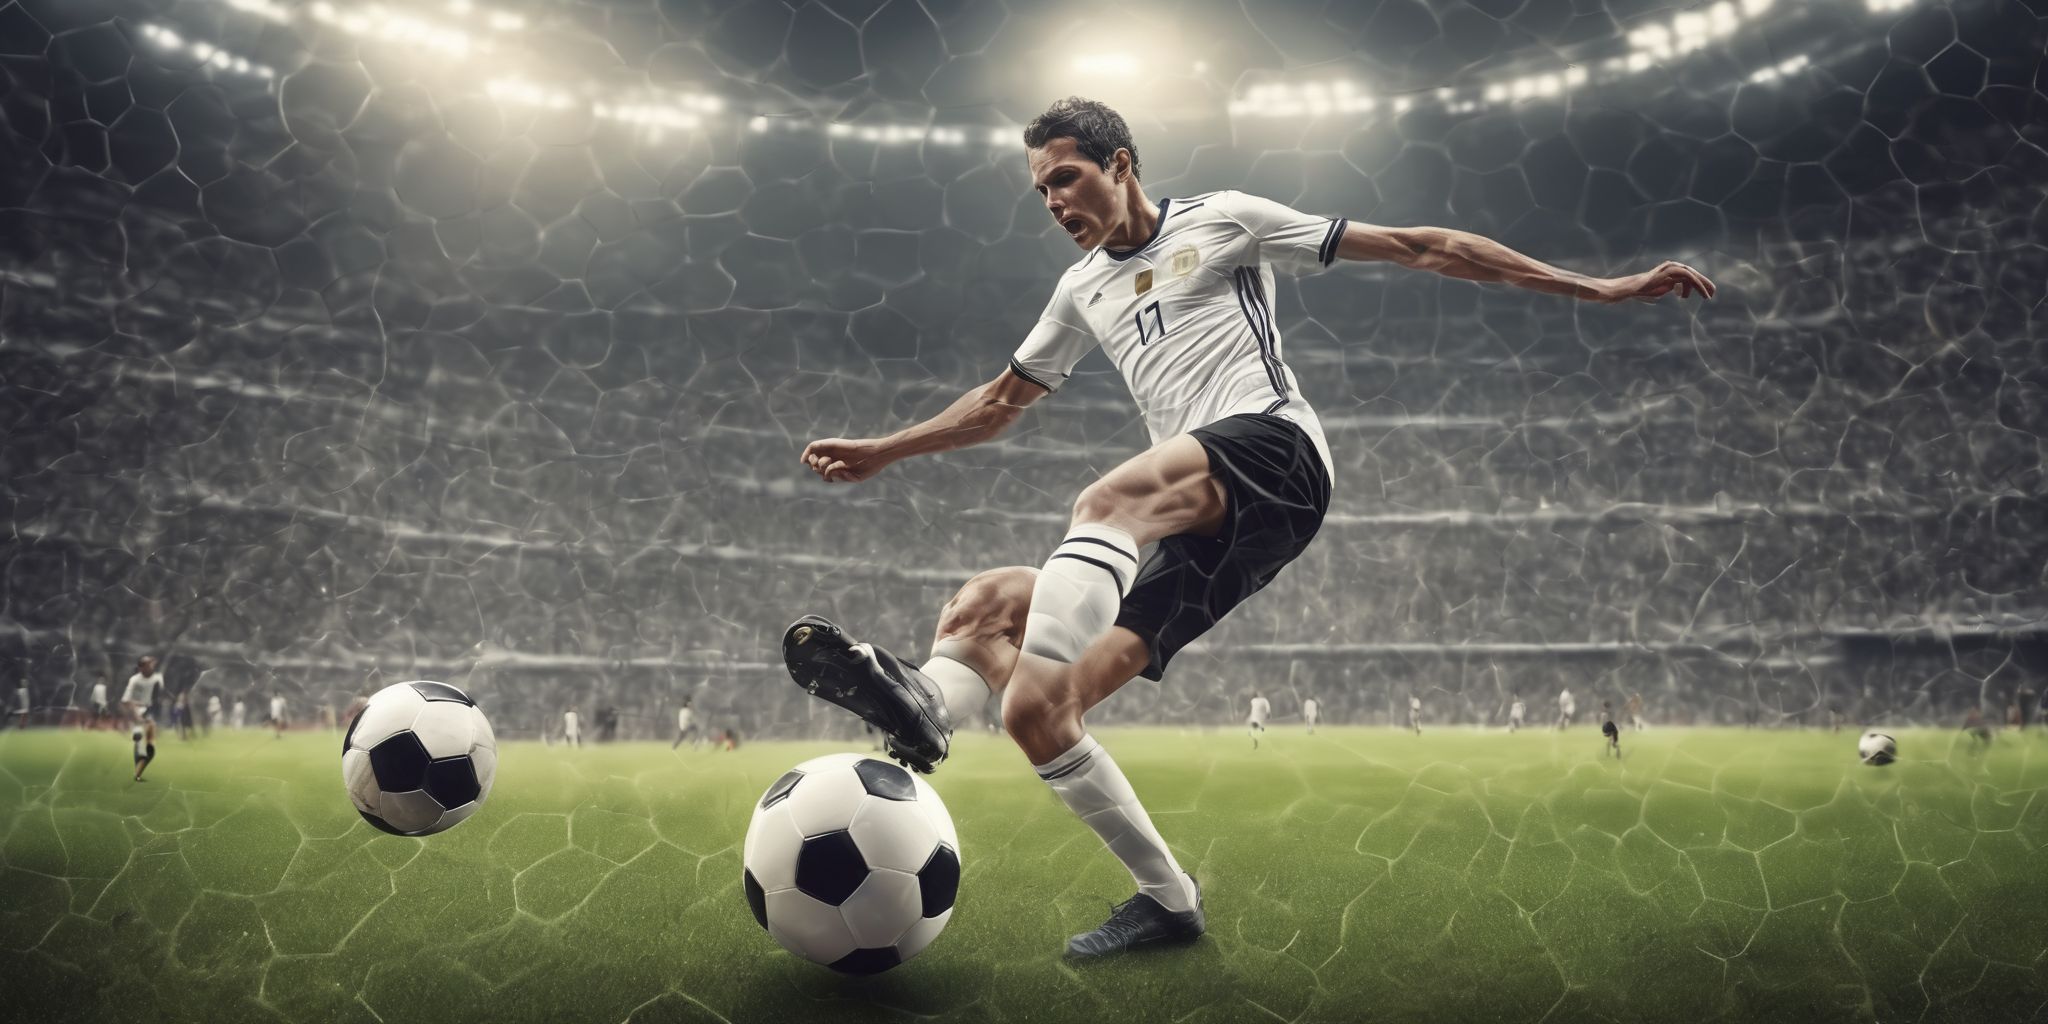 Soccer  in realistic, photographic style